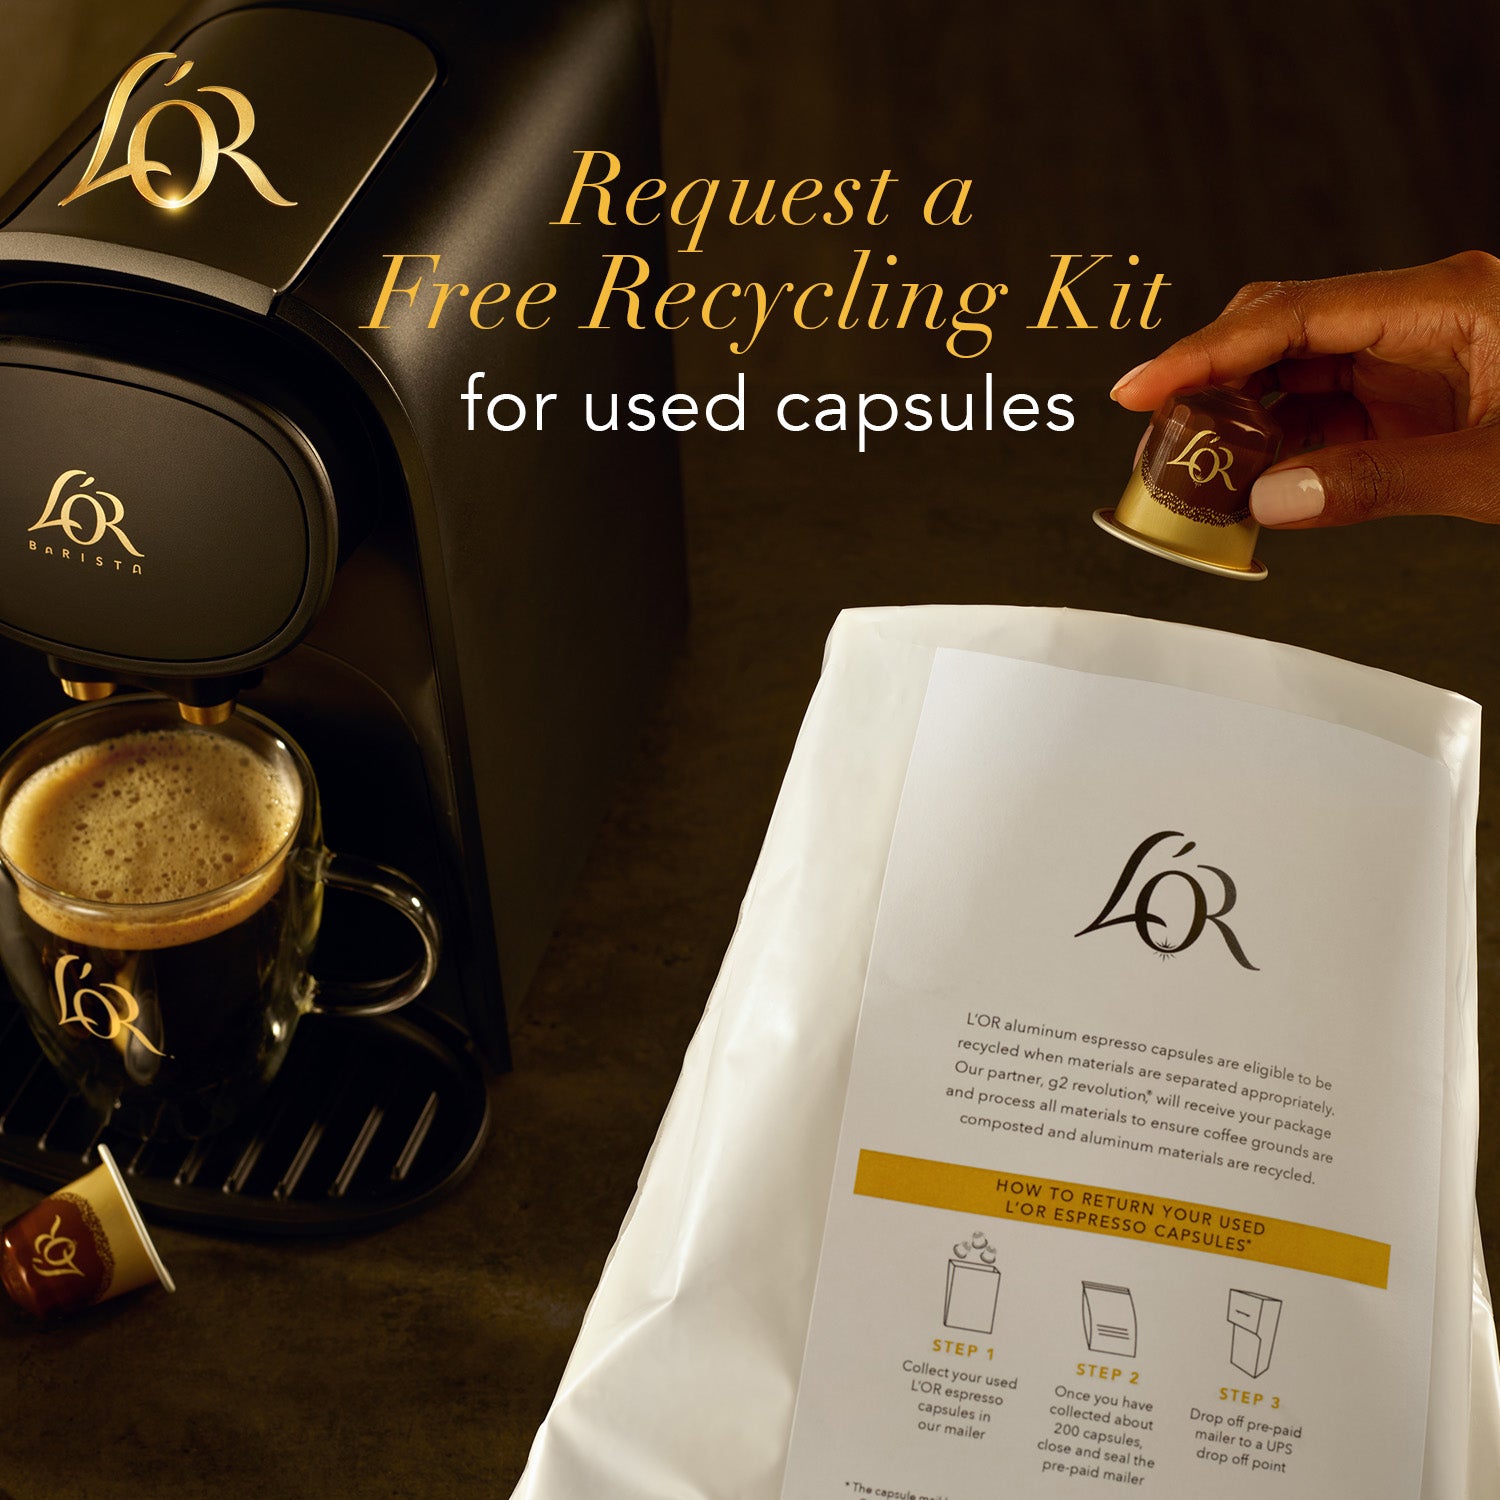 Image of L'OR Recycling Kit.